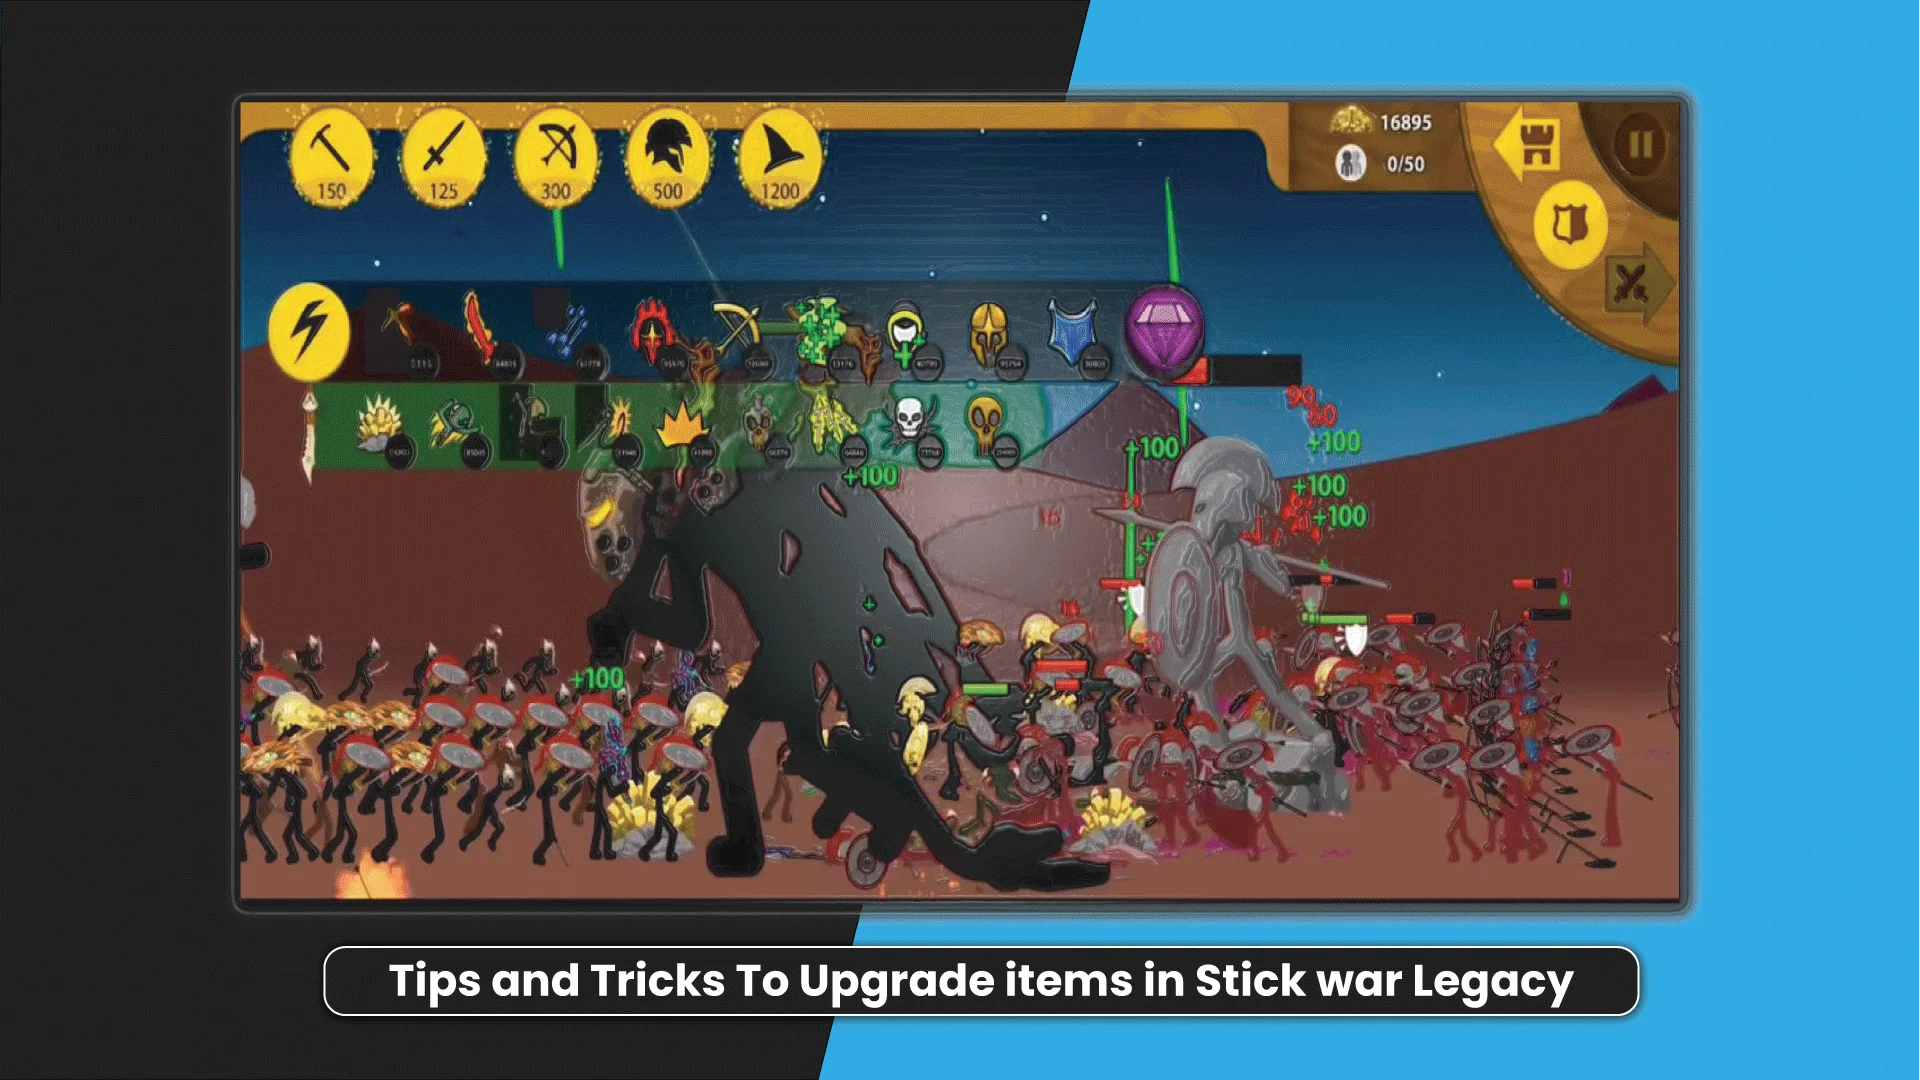 Tips and Tricks To Upgrade items in Stick war Legacy